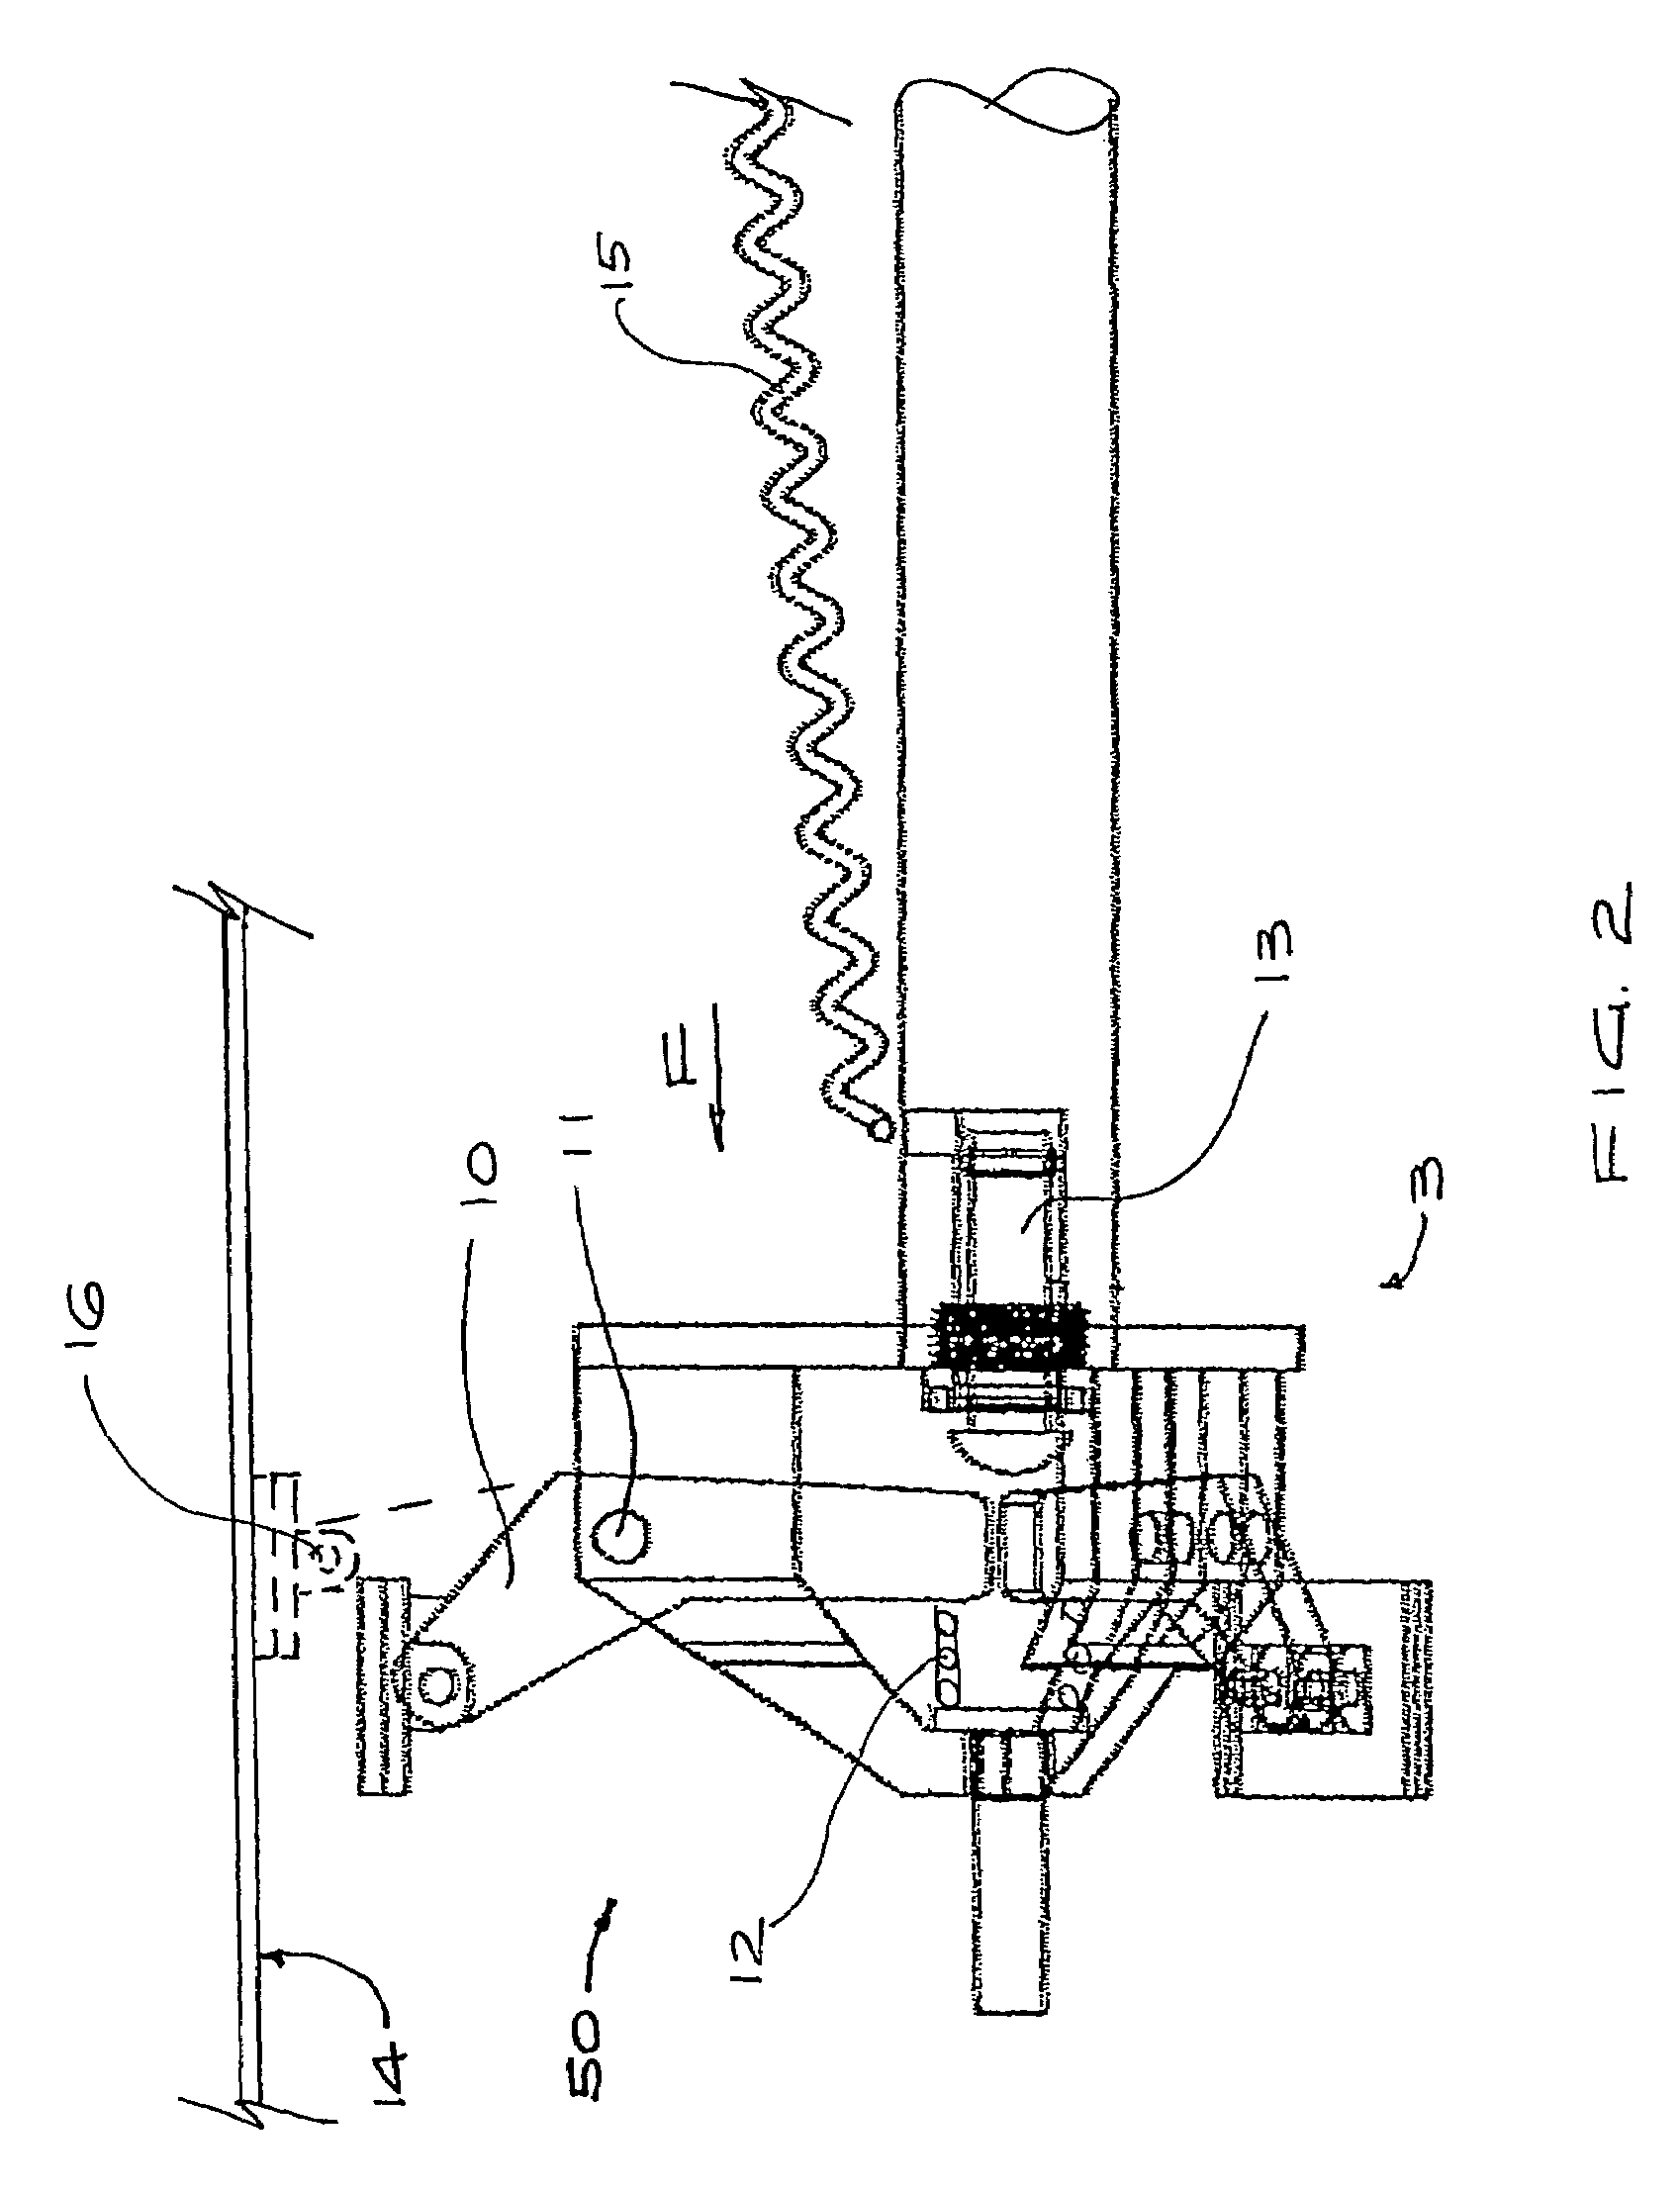 Self-propelled vehicle for use in a conduit